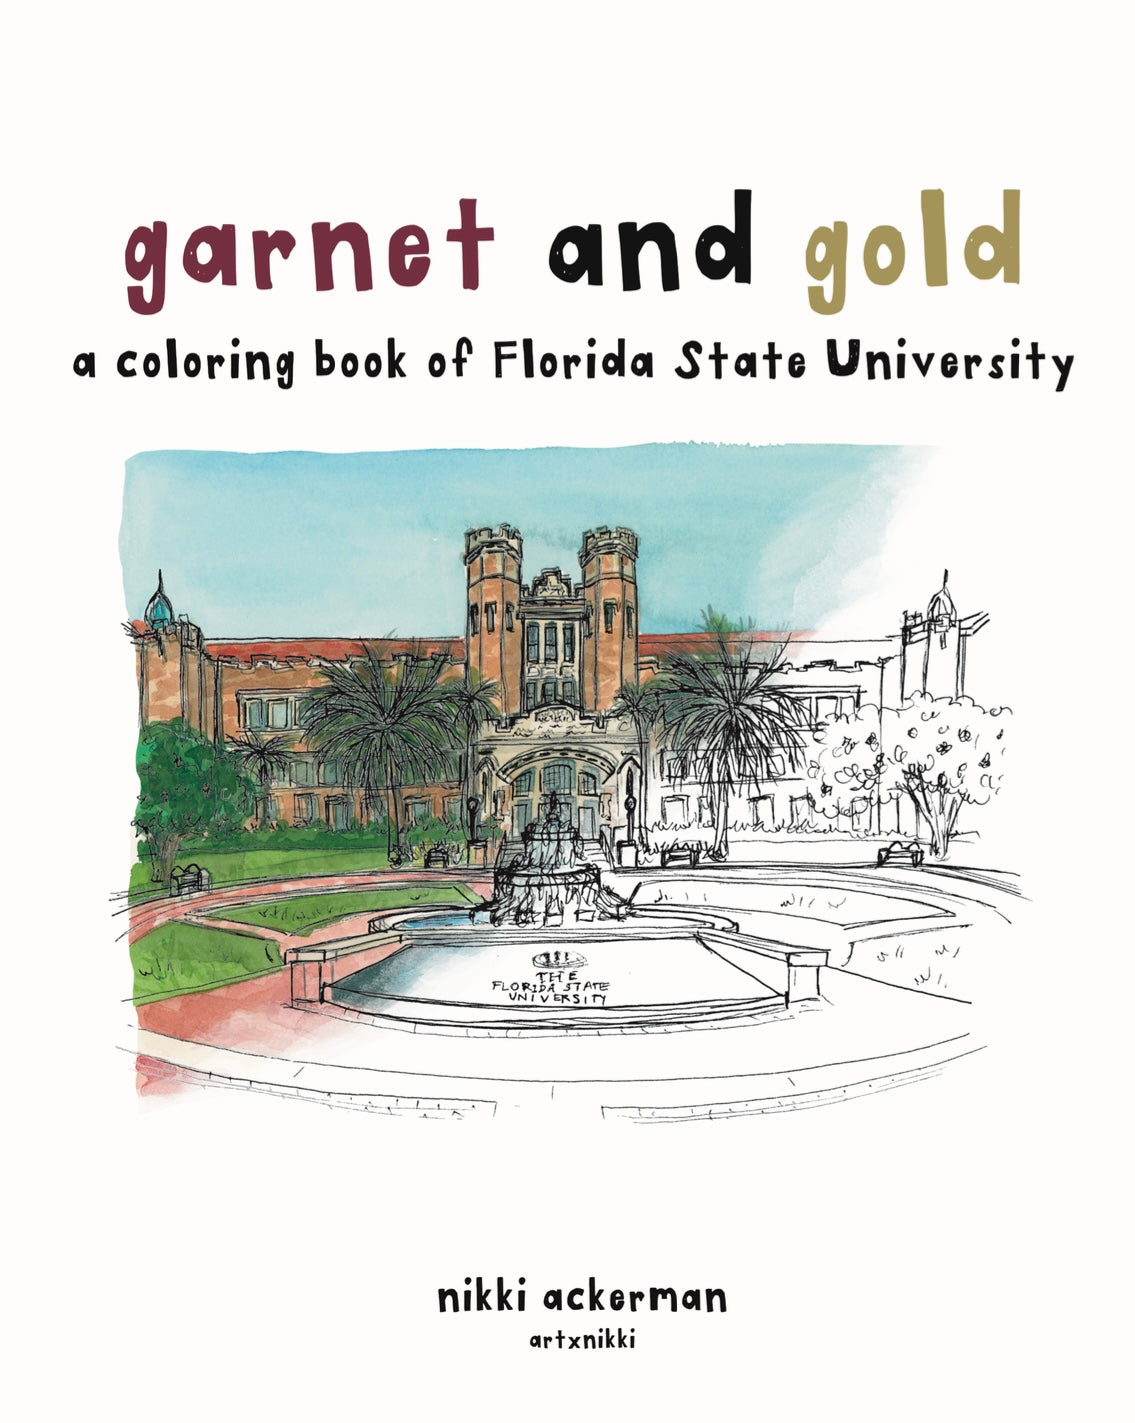 Garnet and Gold: a coloring book of Florida State Univeristy